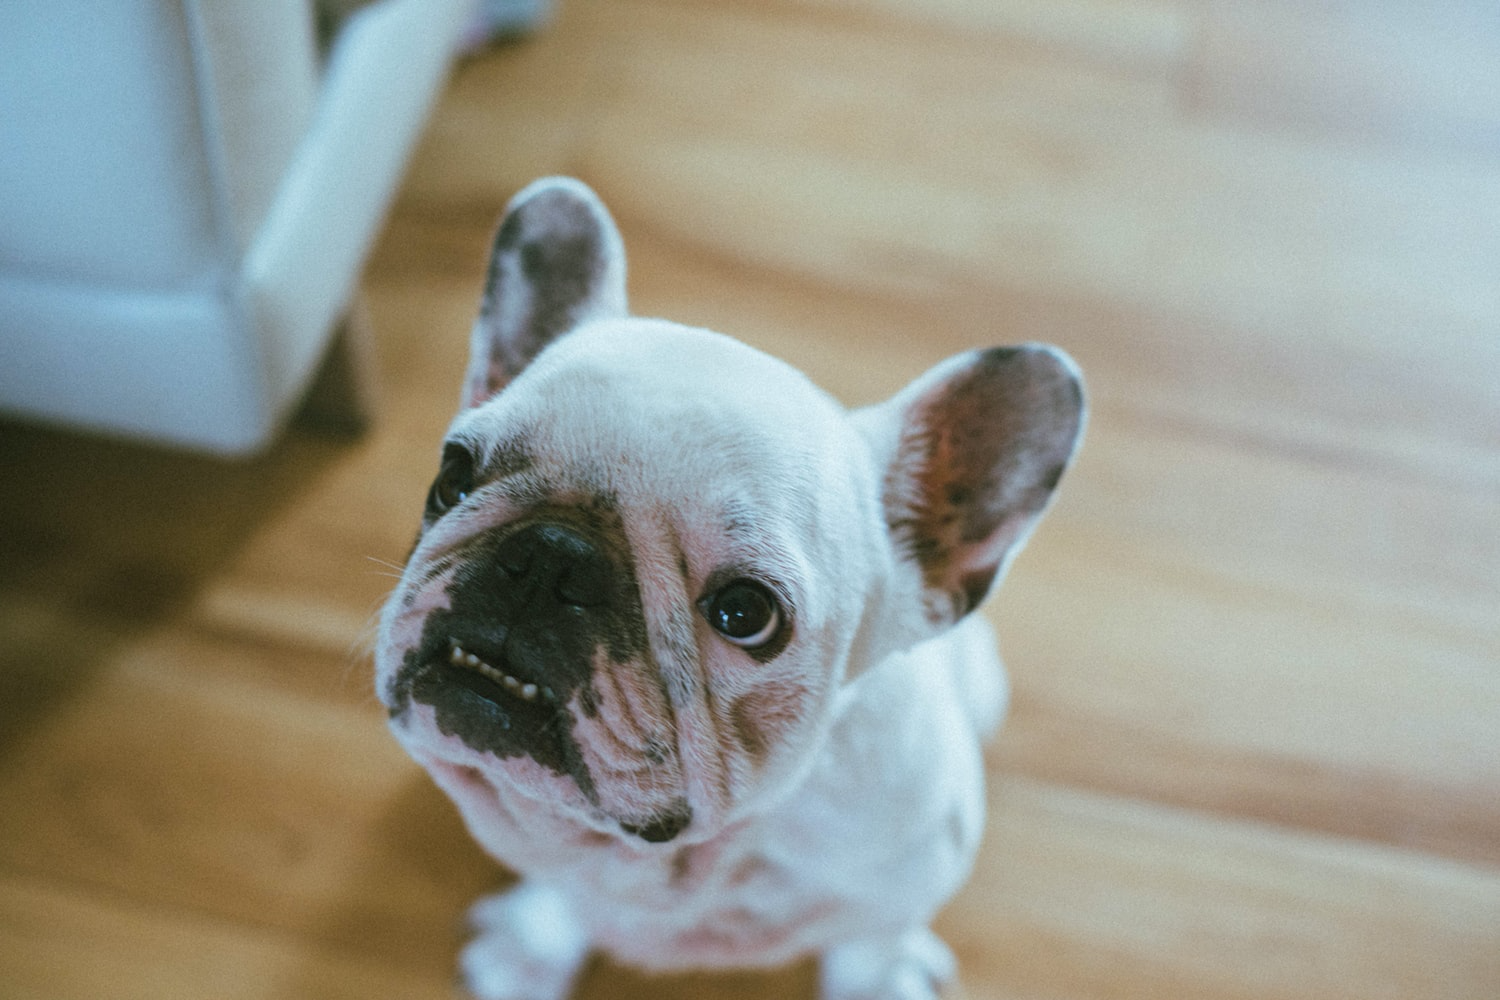 A French Bulldog sitting on the floor while looking up with its begging face